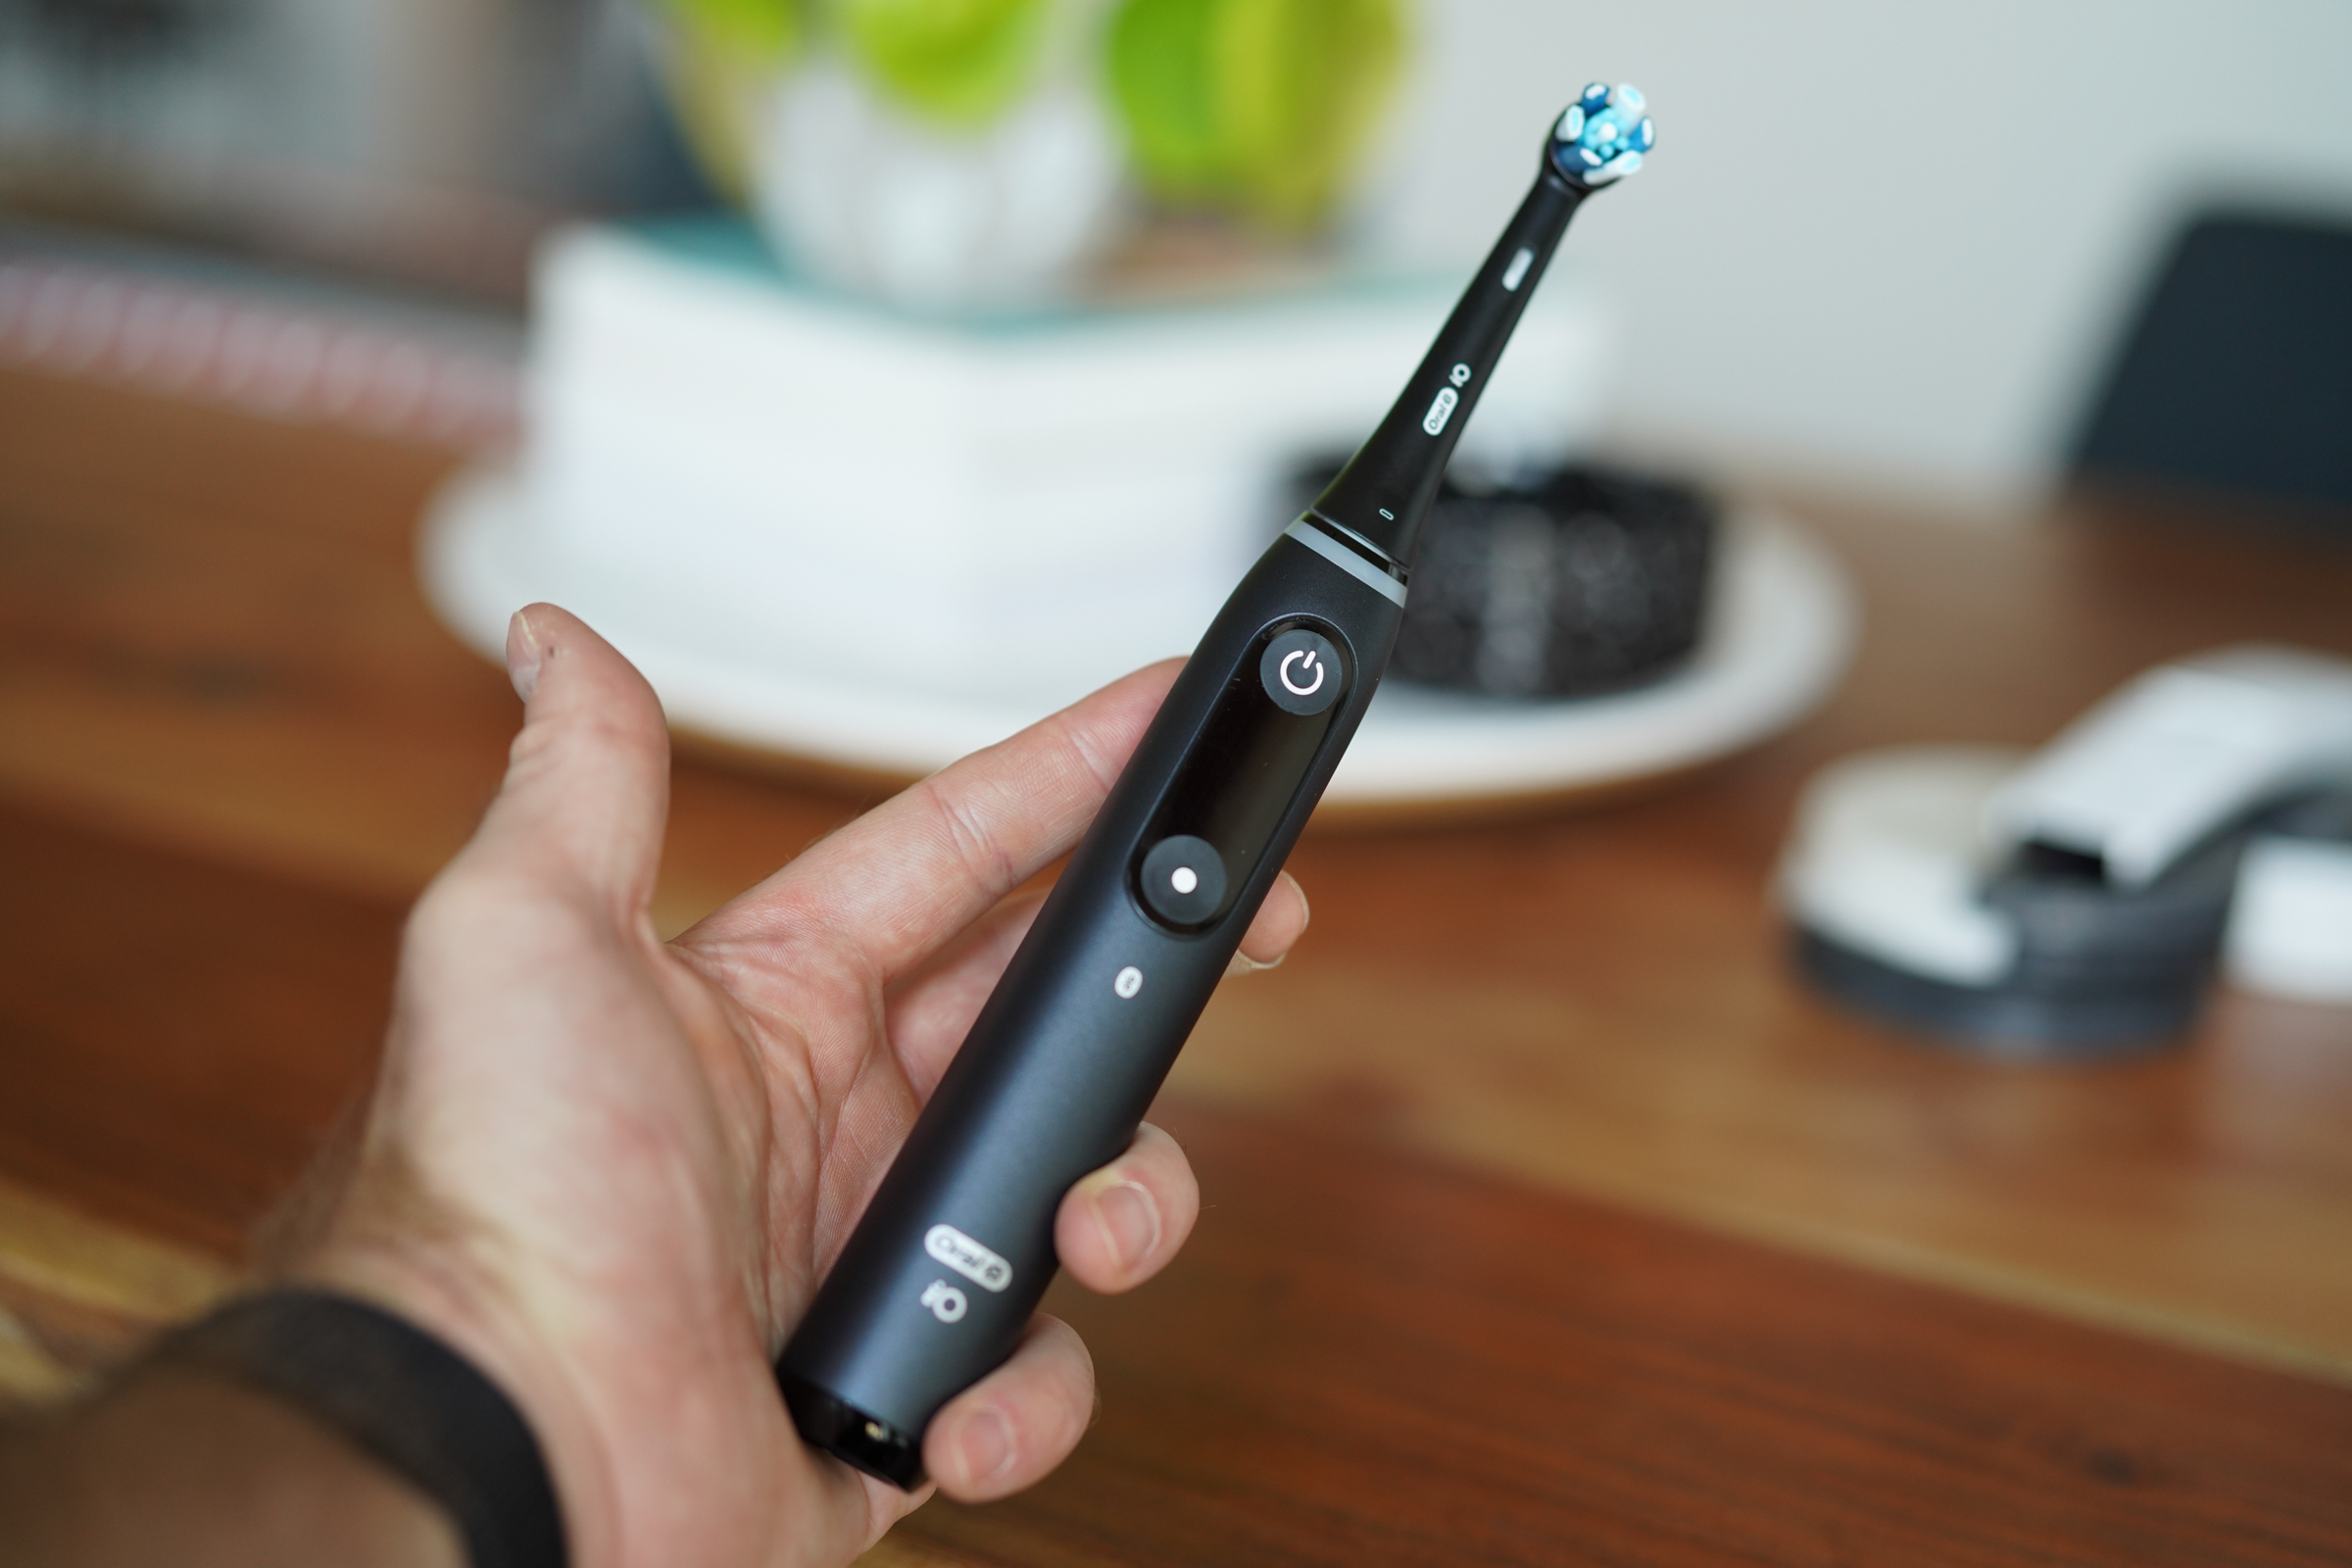 Oral-B's iO smart toothbrush is a big upgrade in just about every